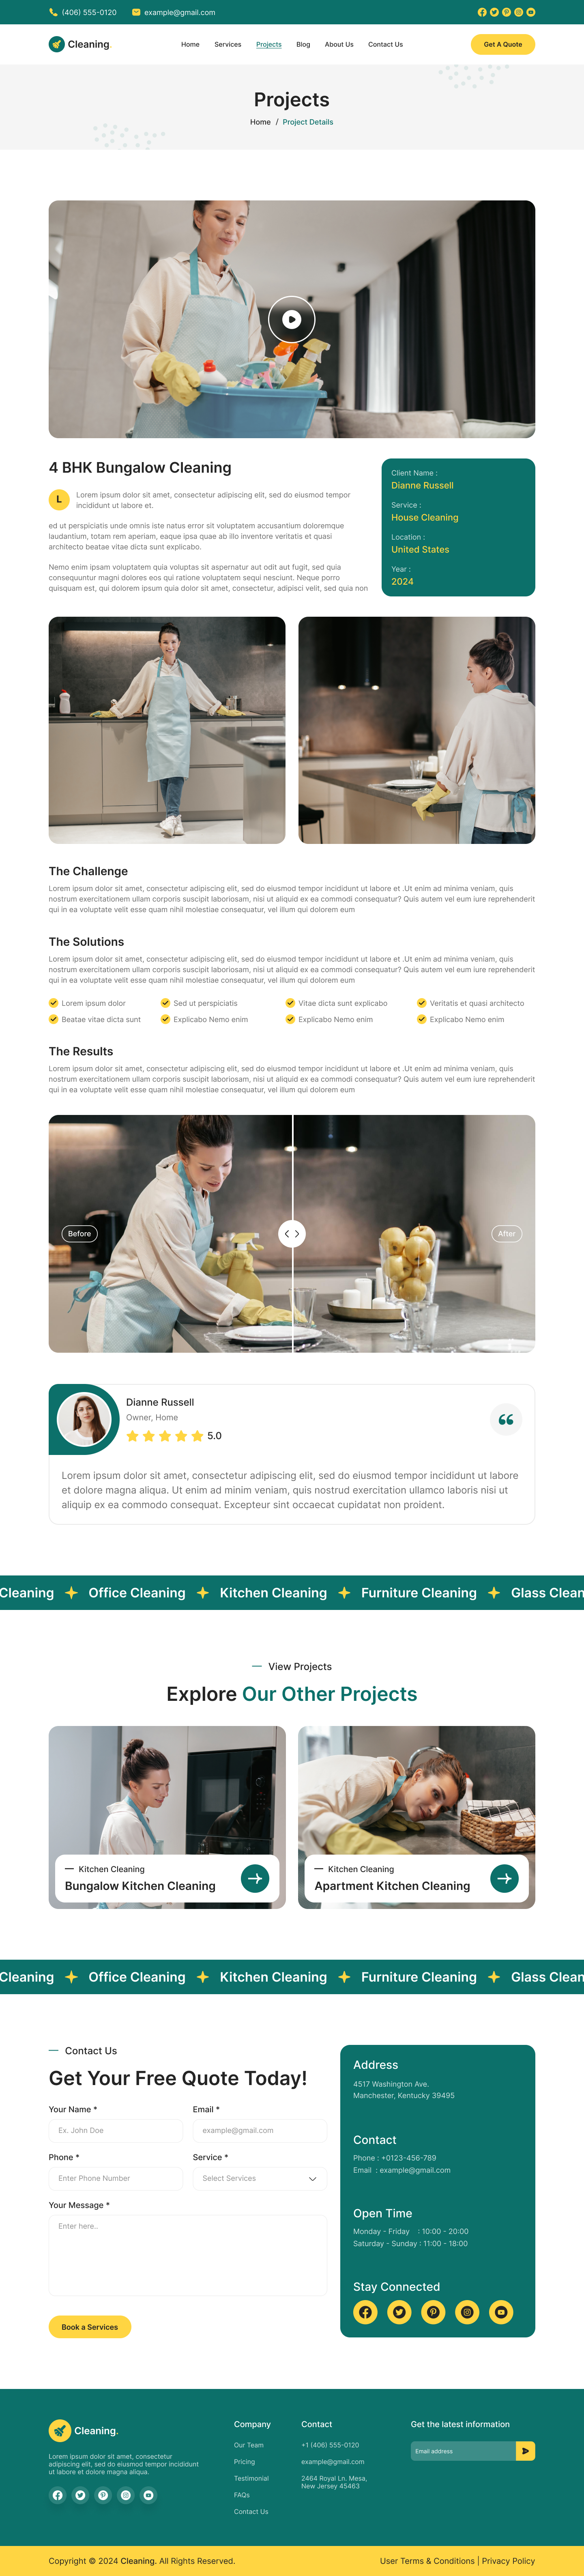 cleaning service website Projects Details Page figma design